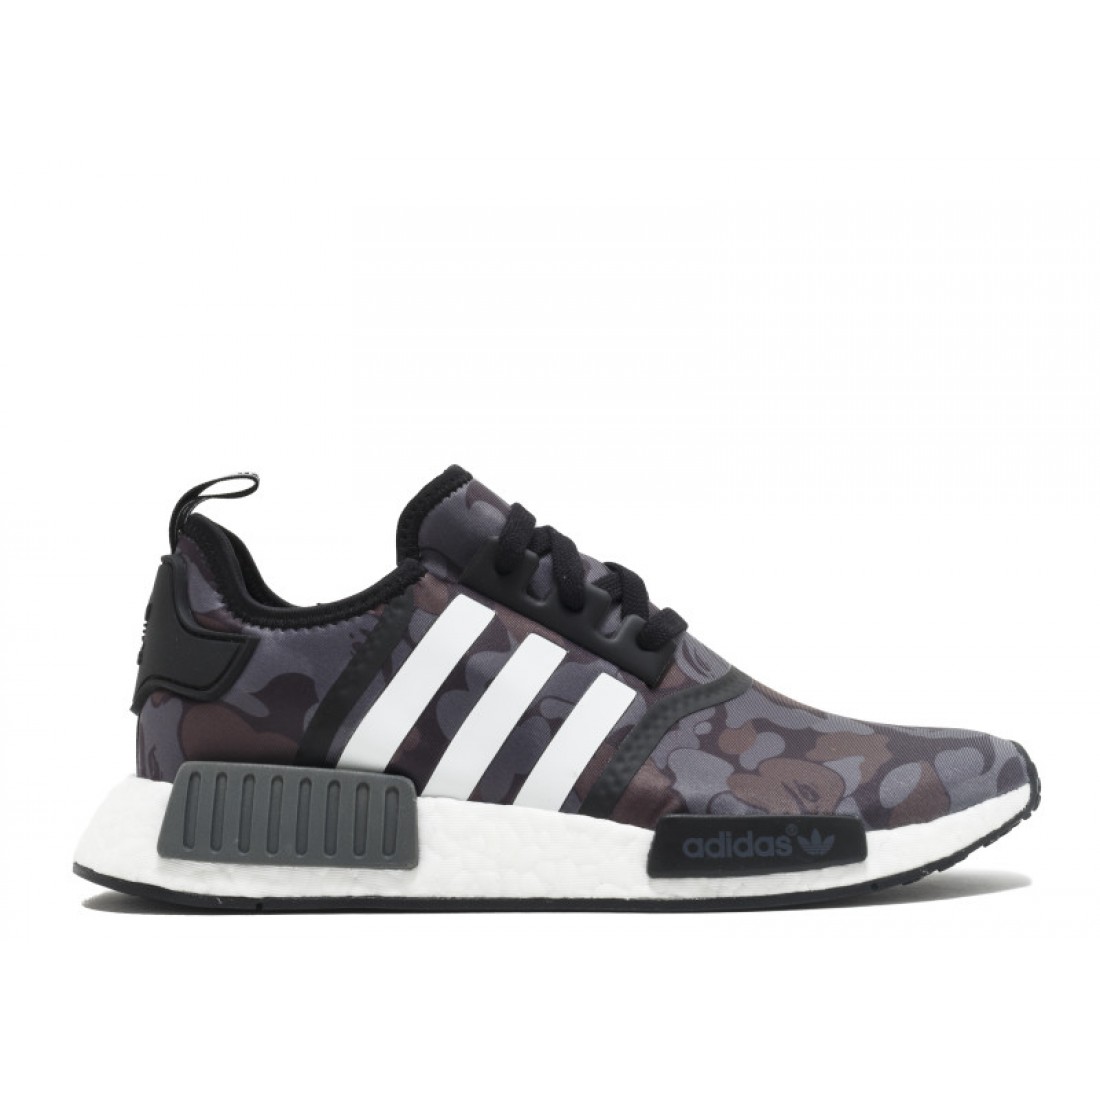 NMD Bape adidas R1 Black Prices in